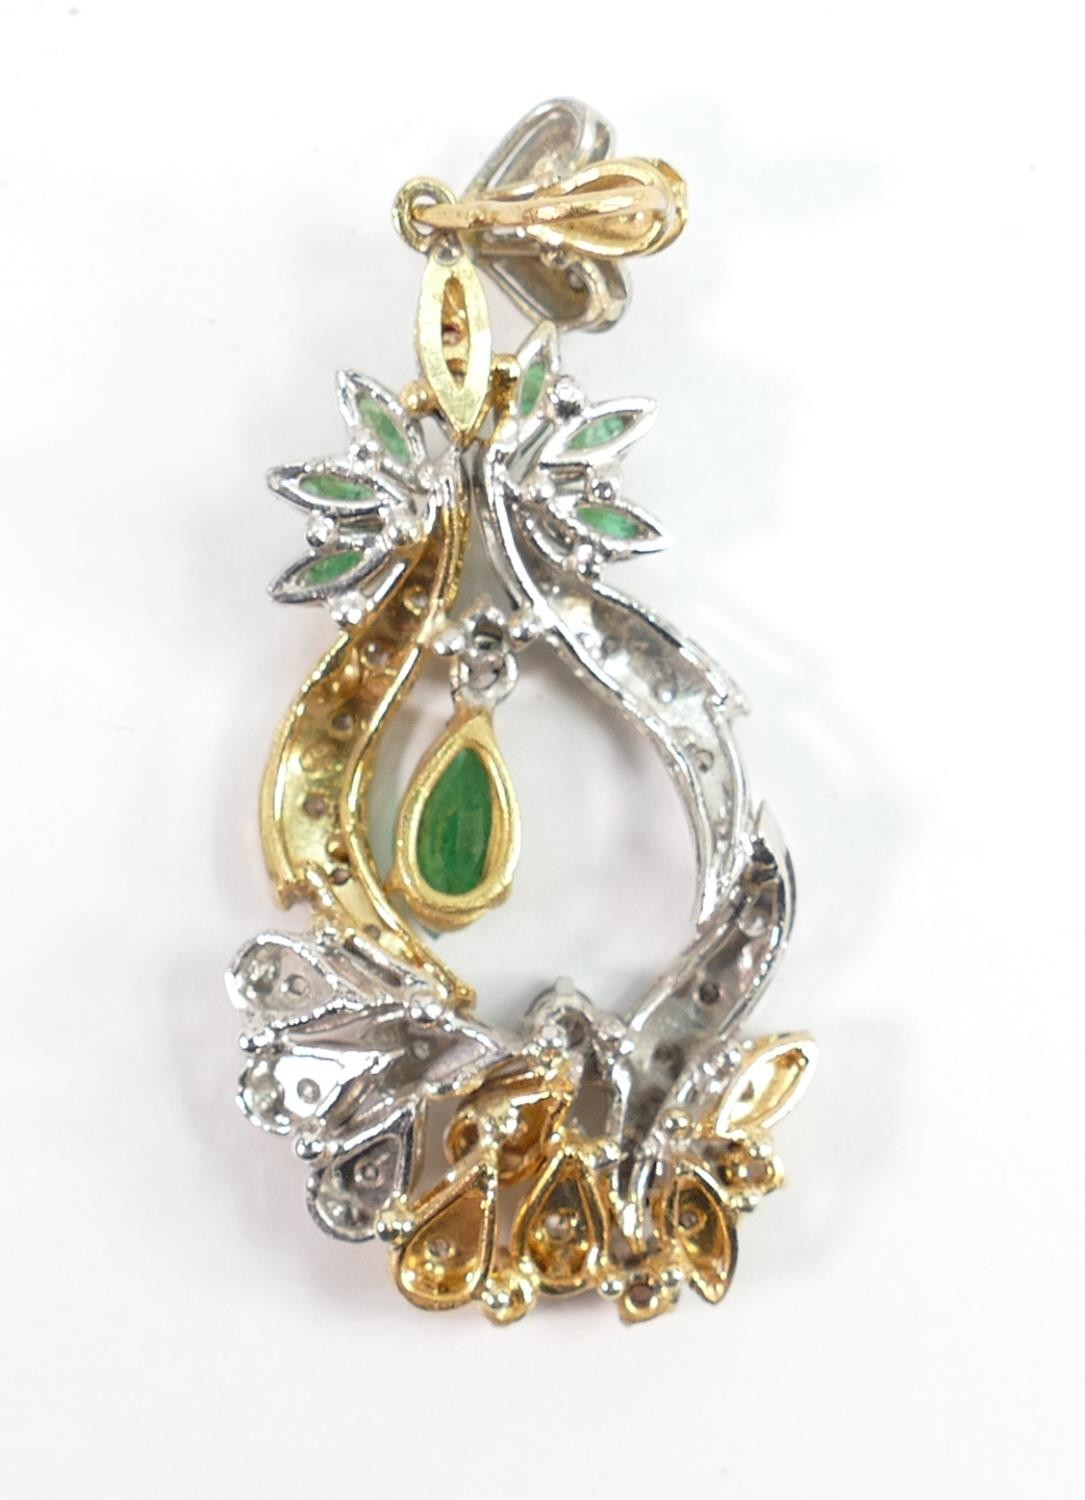 18ct gold diamond and emerald large pendant: Weight 9.2g, and measuring 55mm high. A very impressive